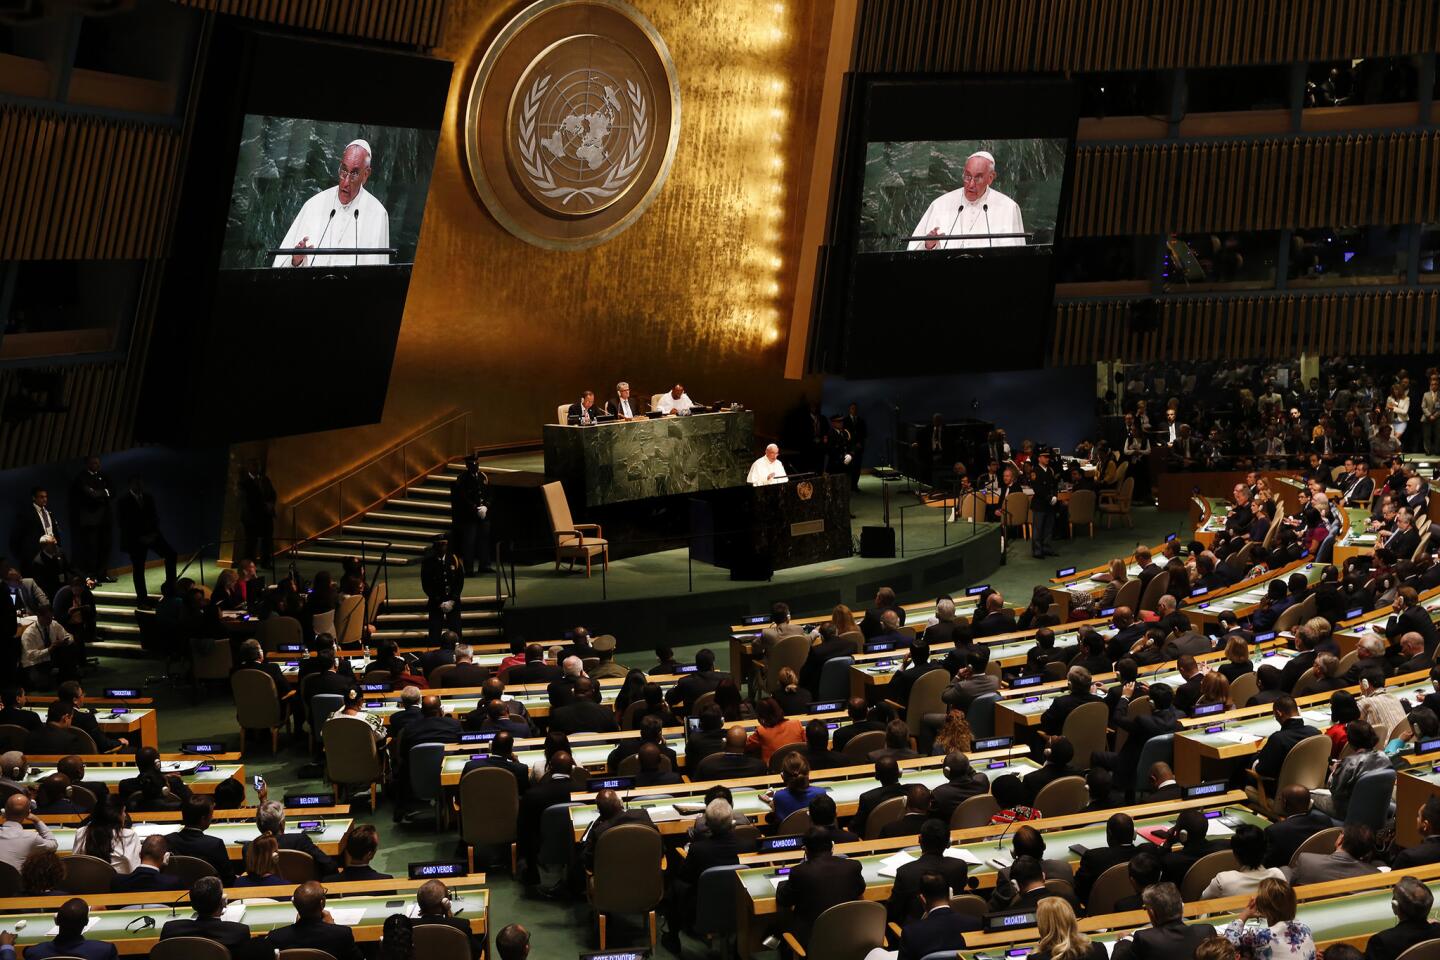 Pope Francis at United Nations